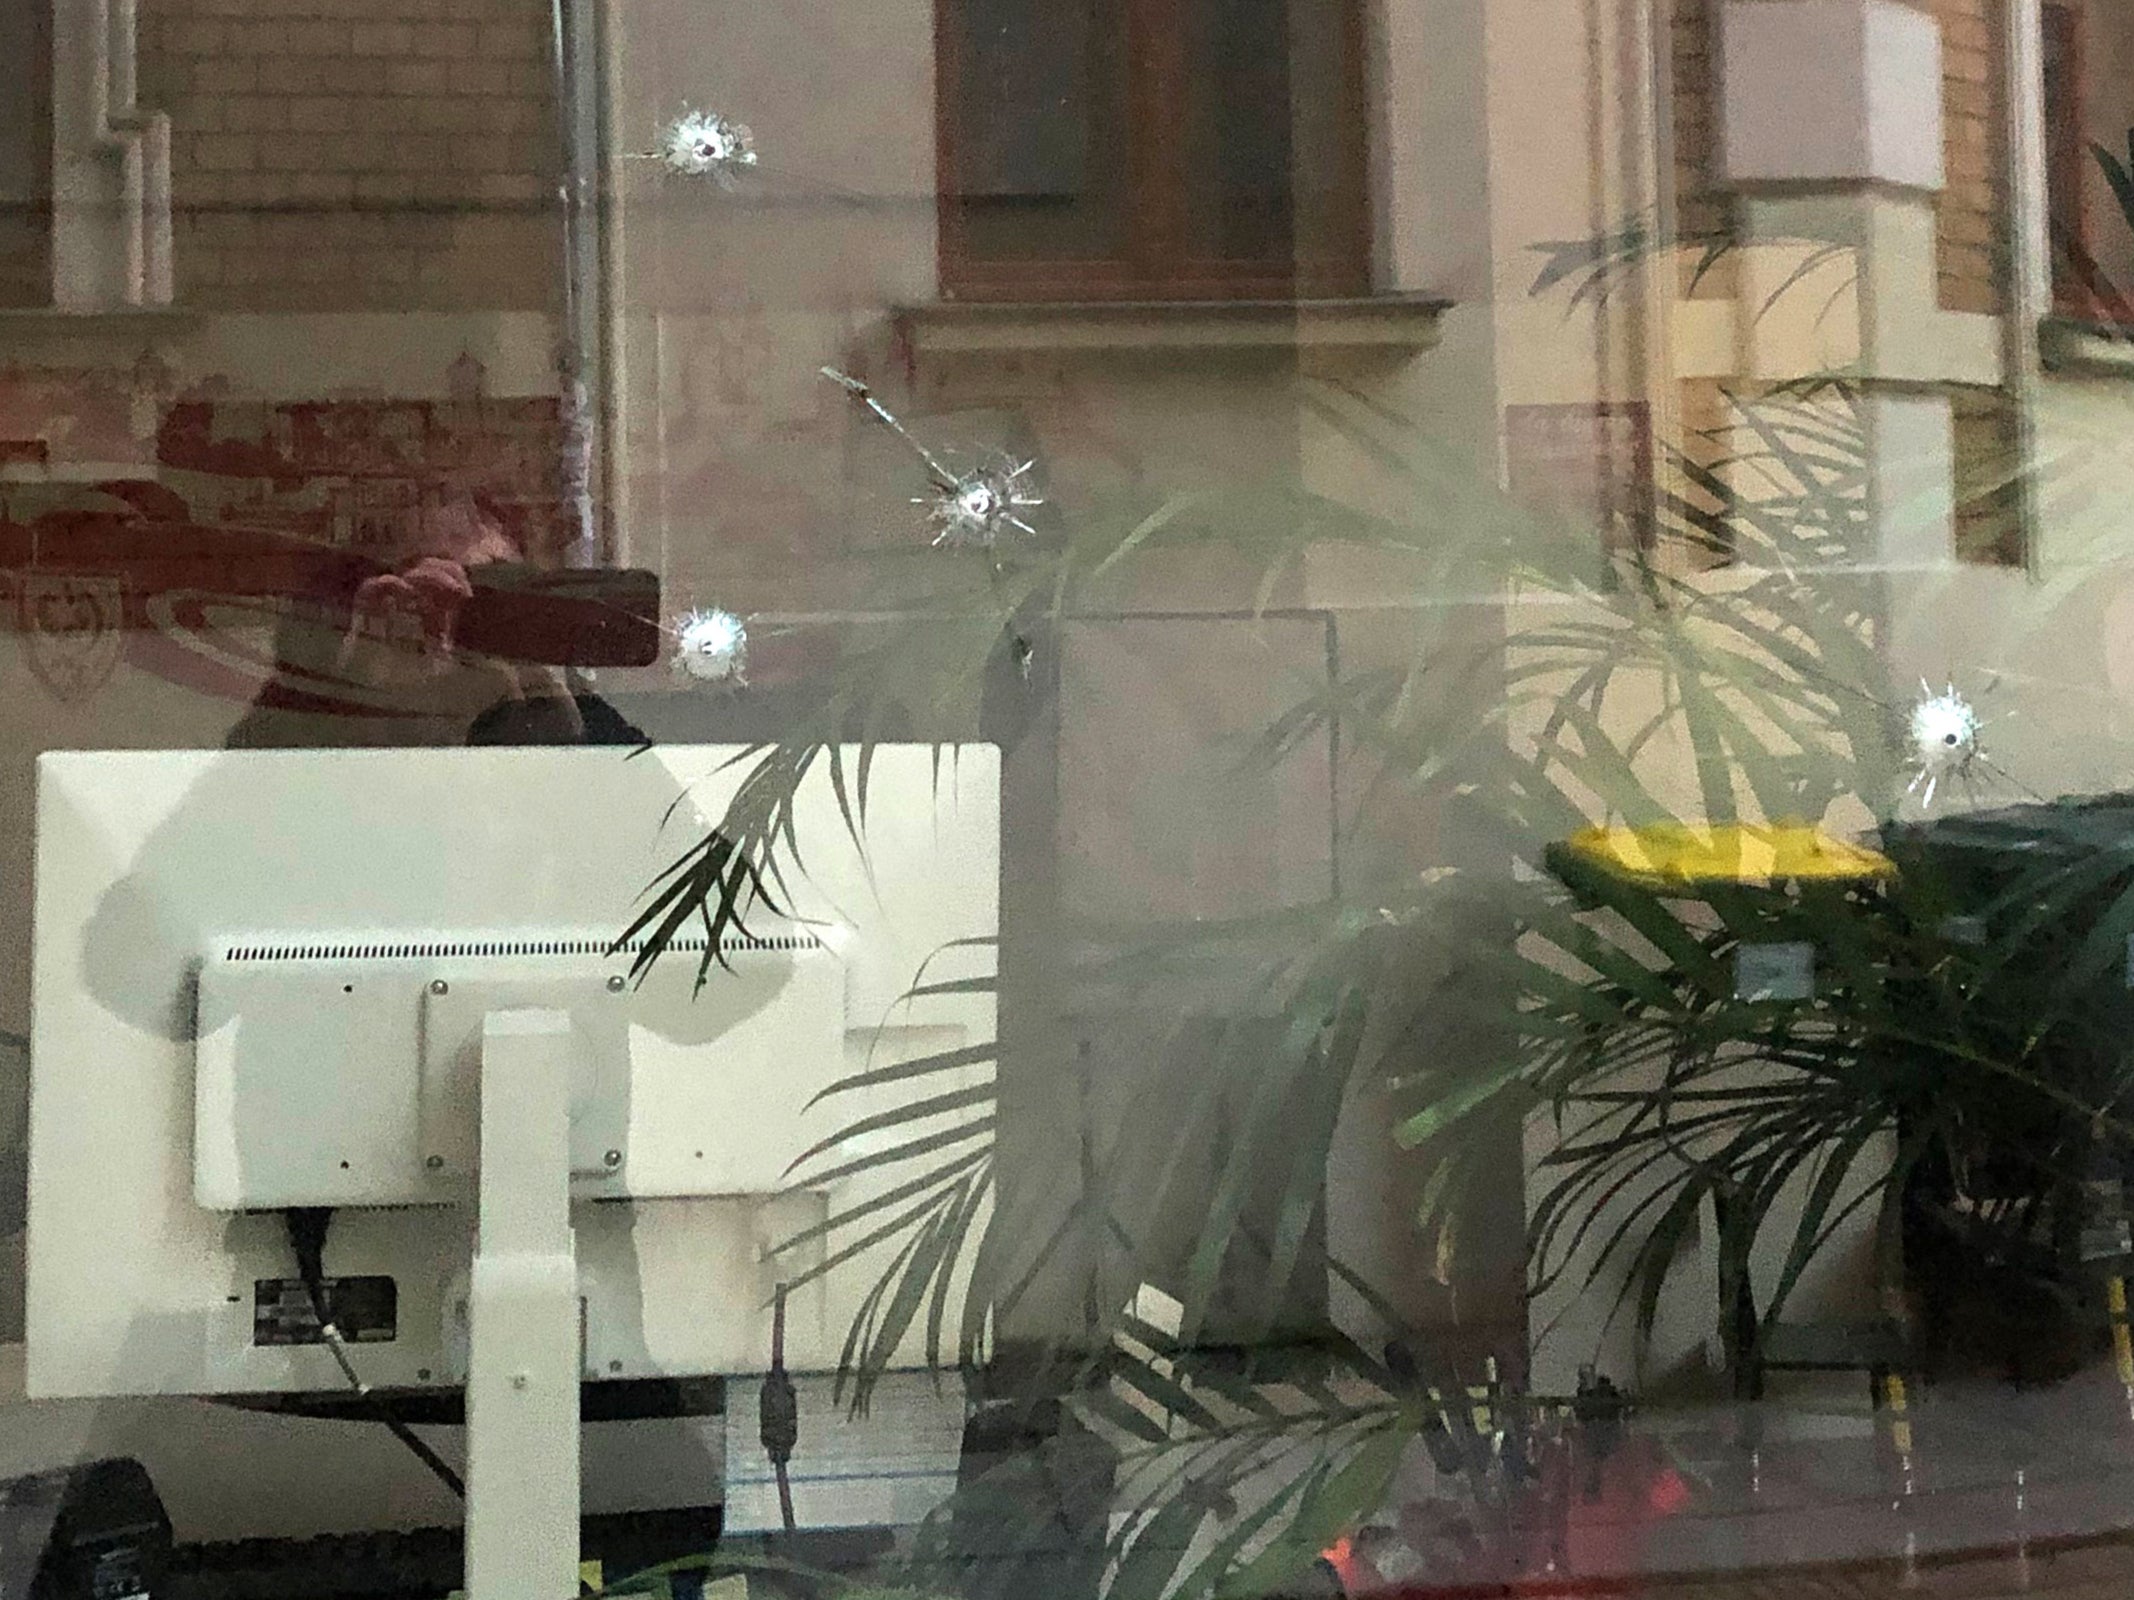 Bullet holes in the window of Karamba Diaby’s constituency office in Halle